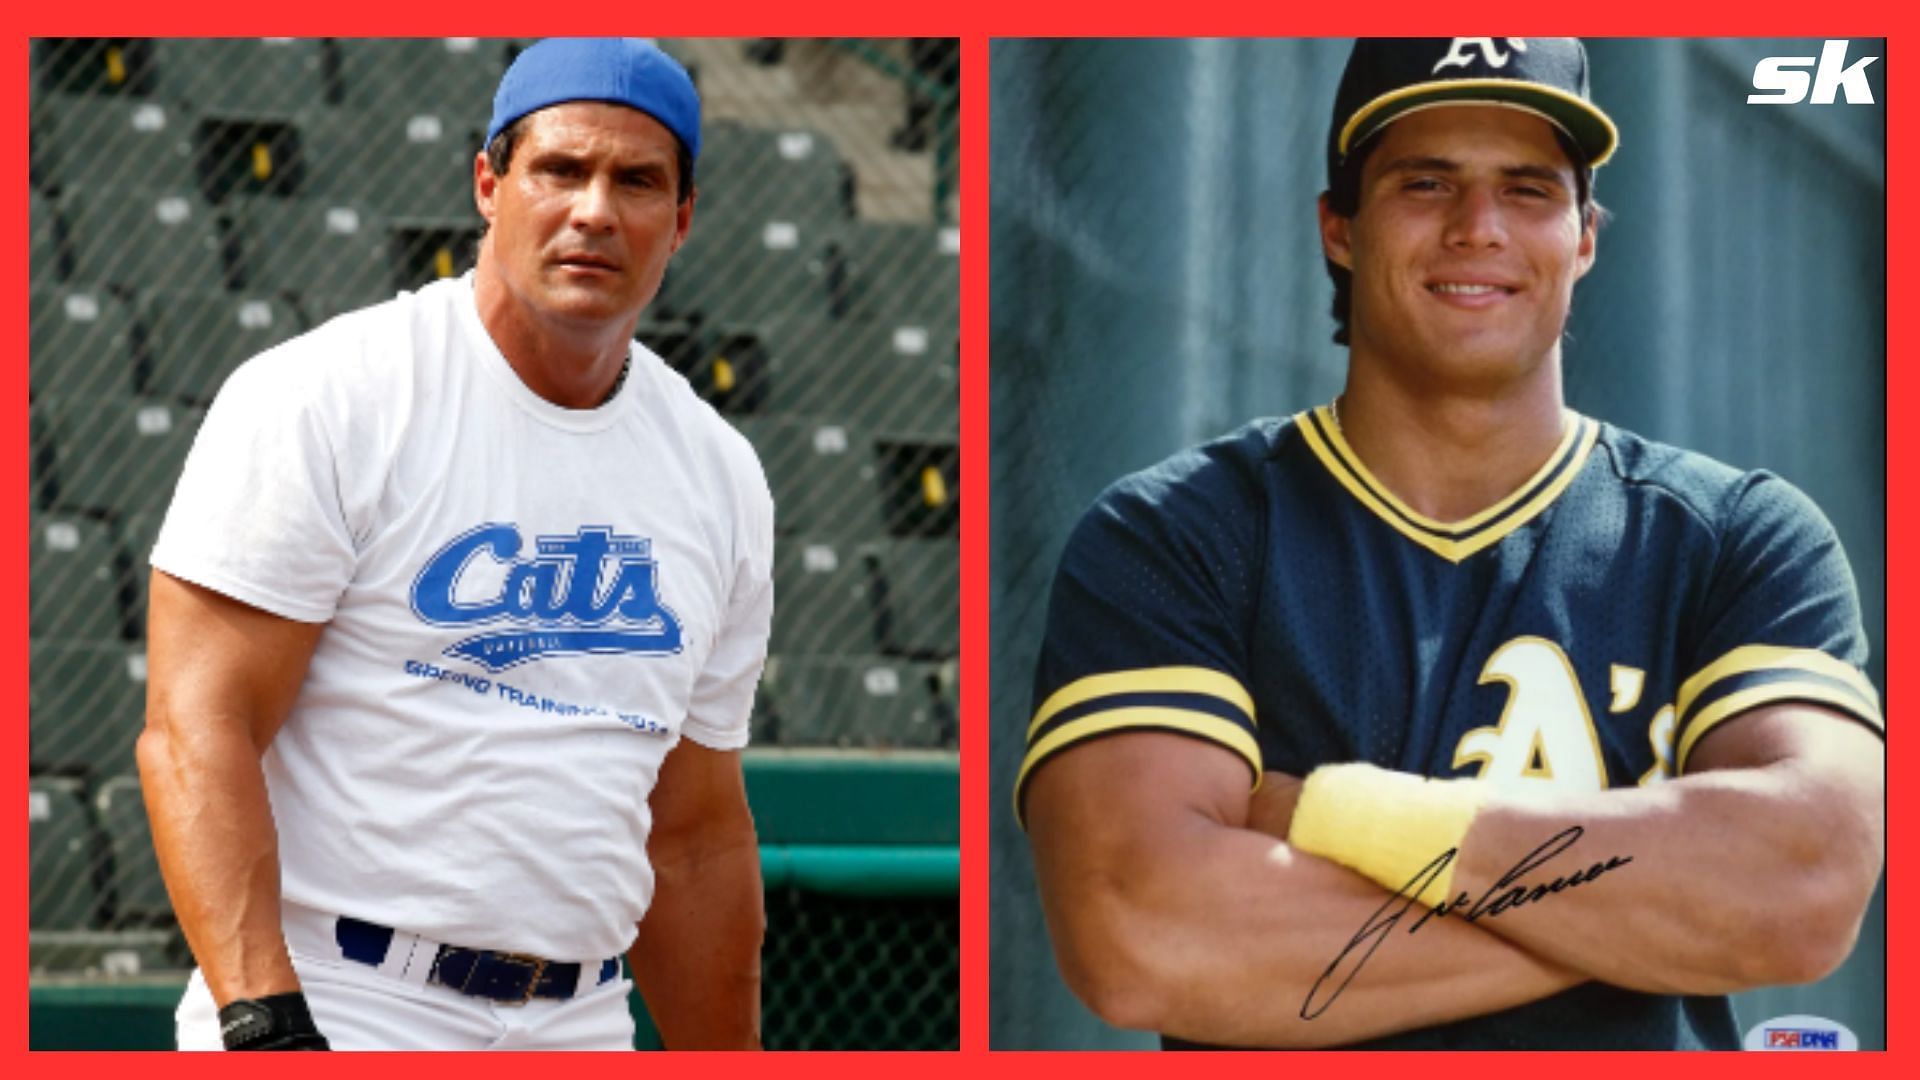 Jose Canseco, former MLB legend